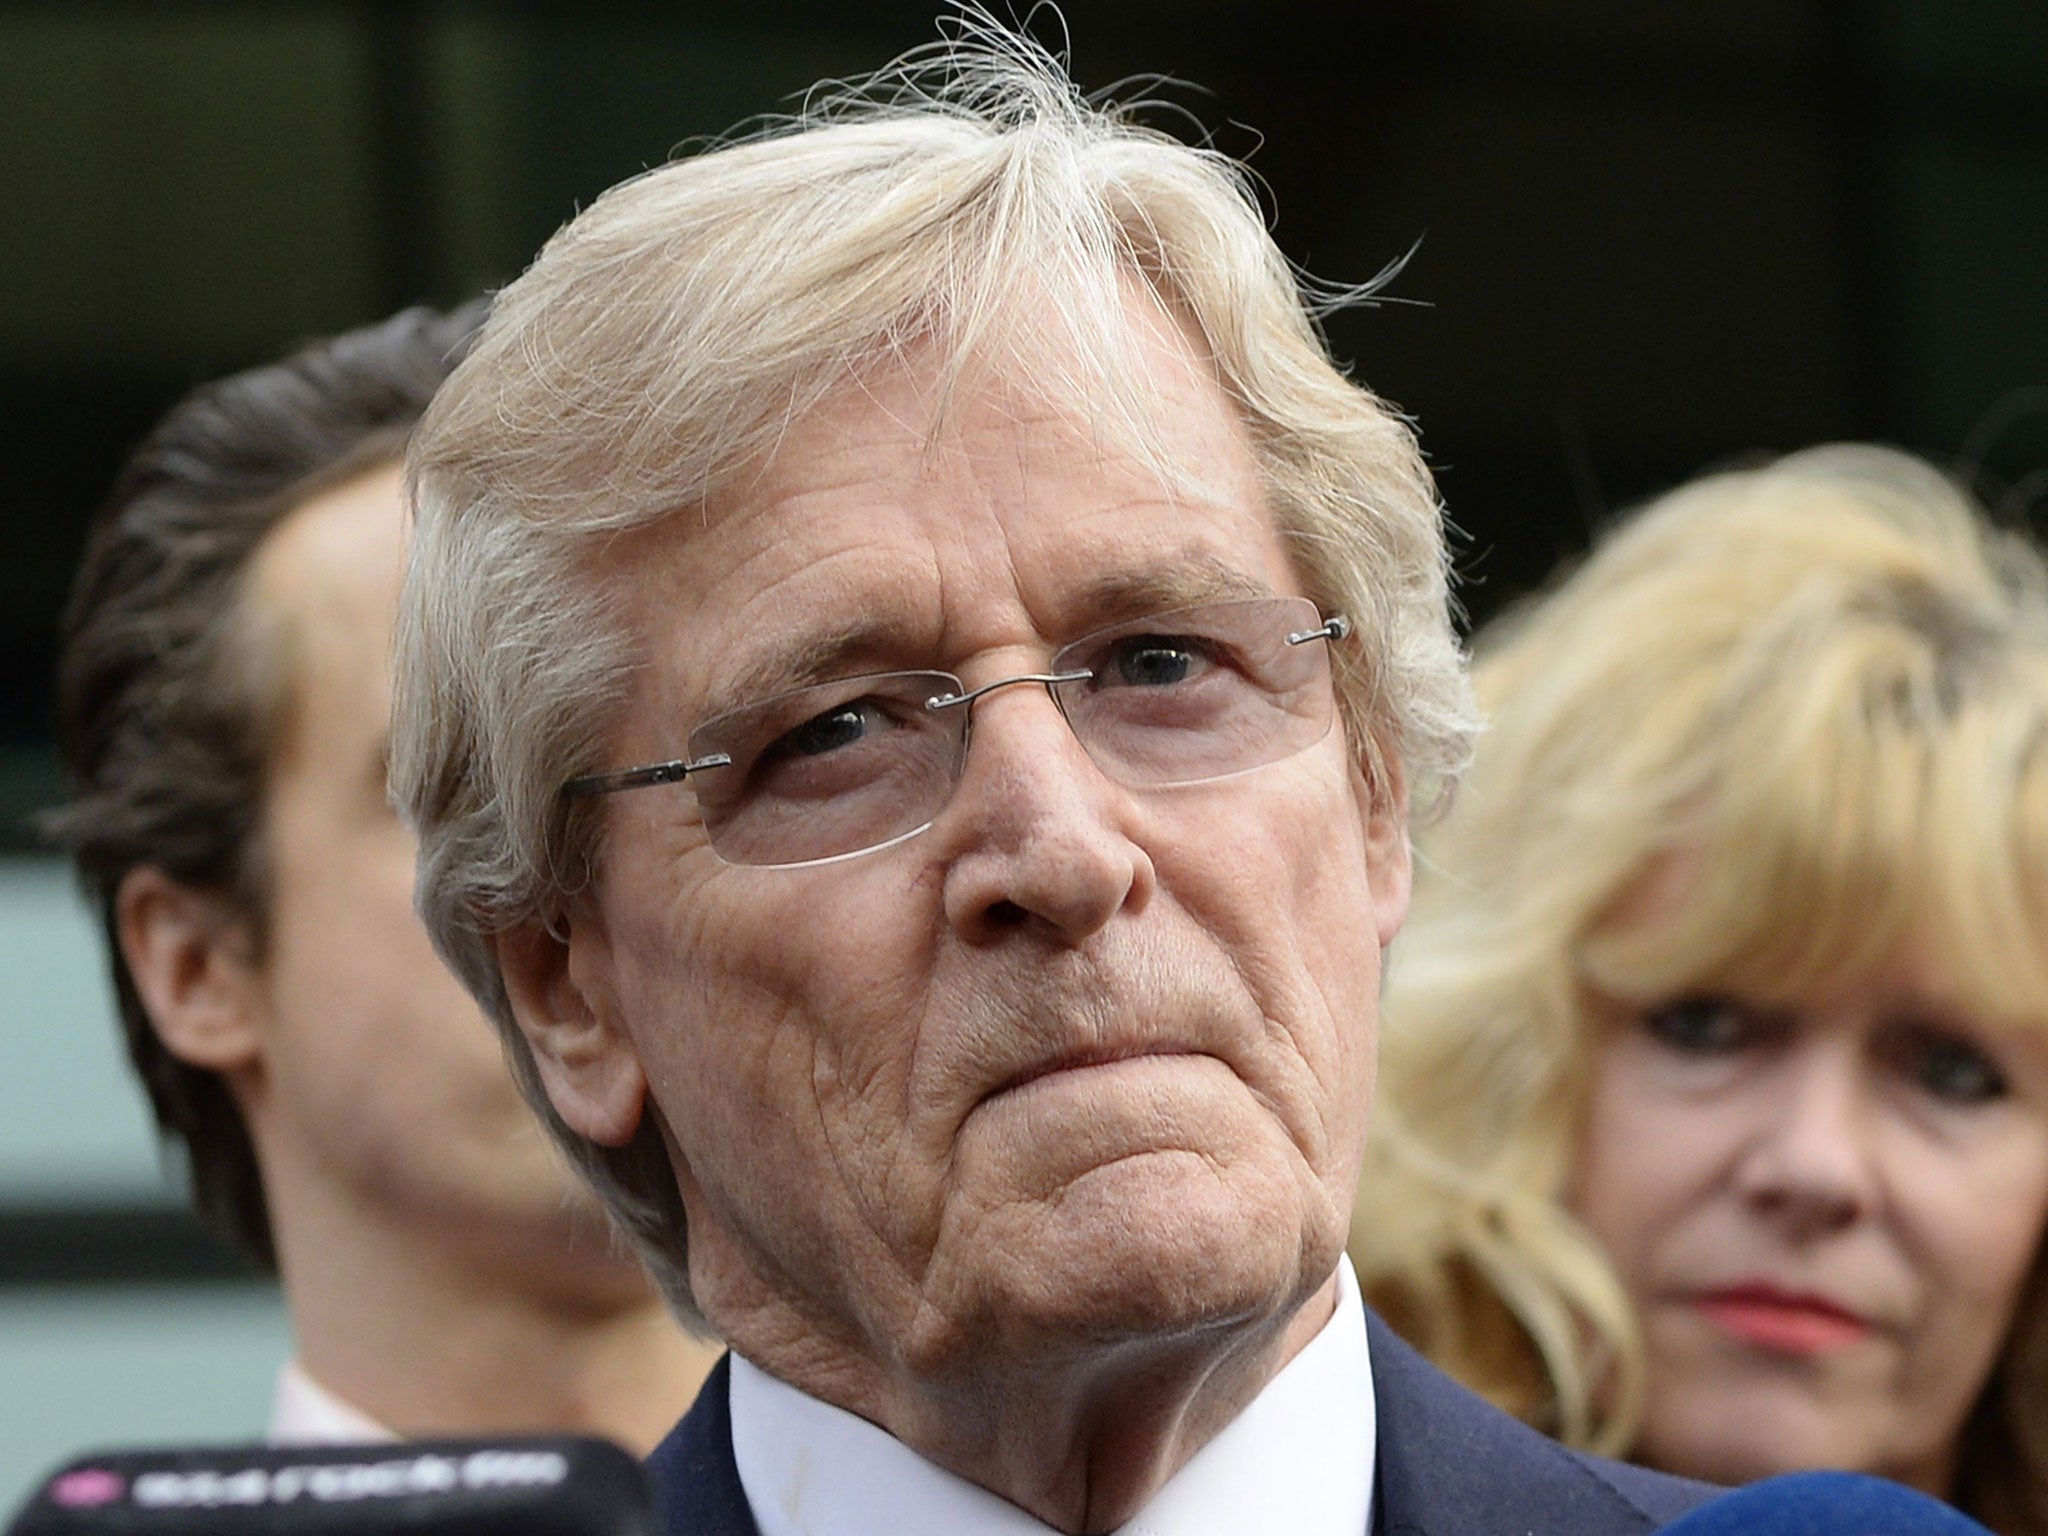 British actor William Roache, who plays the character of Ken Barlow in the soap opera Coronation Street, speaks to media after being cleared of all sexual offence charges at Preston Crown Court in Preston